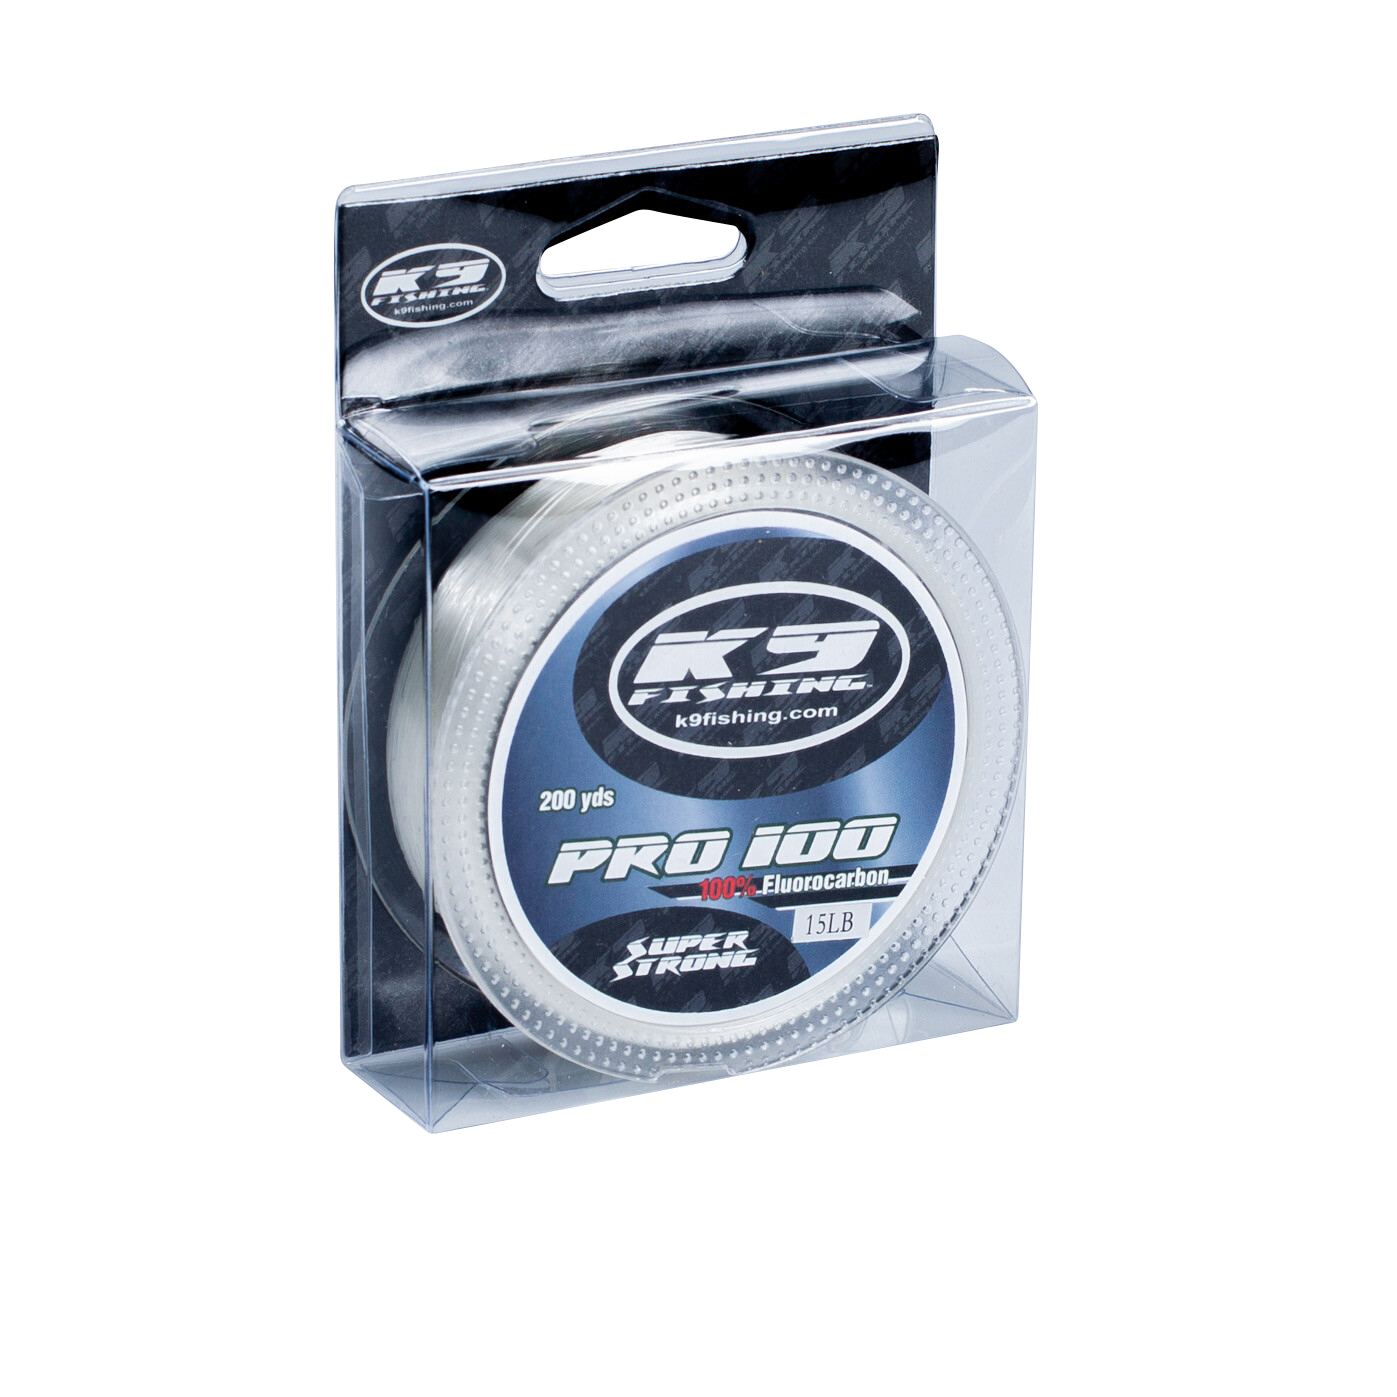 K9 Pro100 100% Fluorocarbon from $19.99